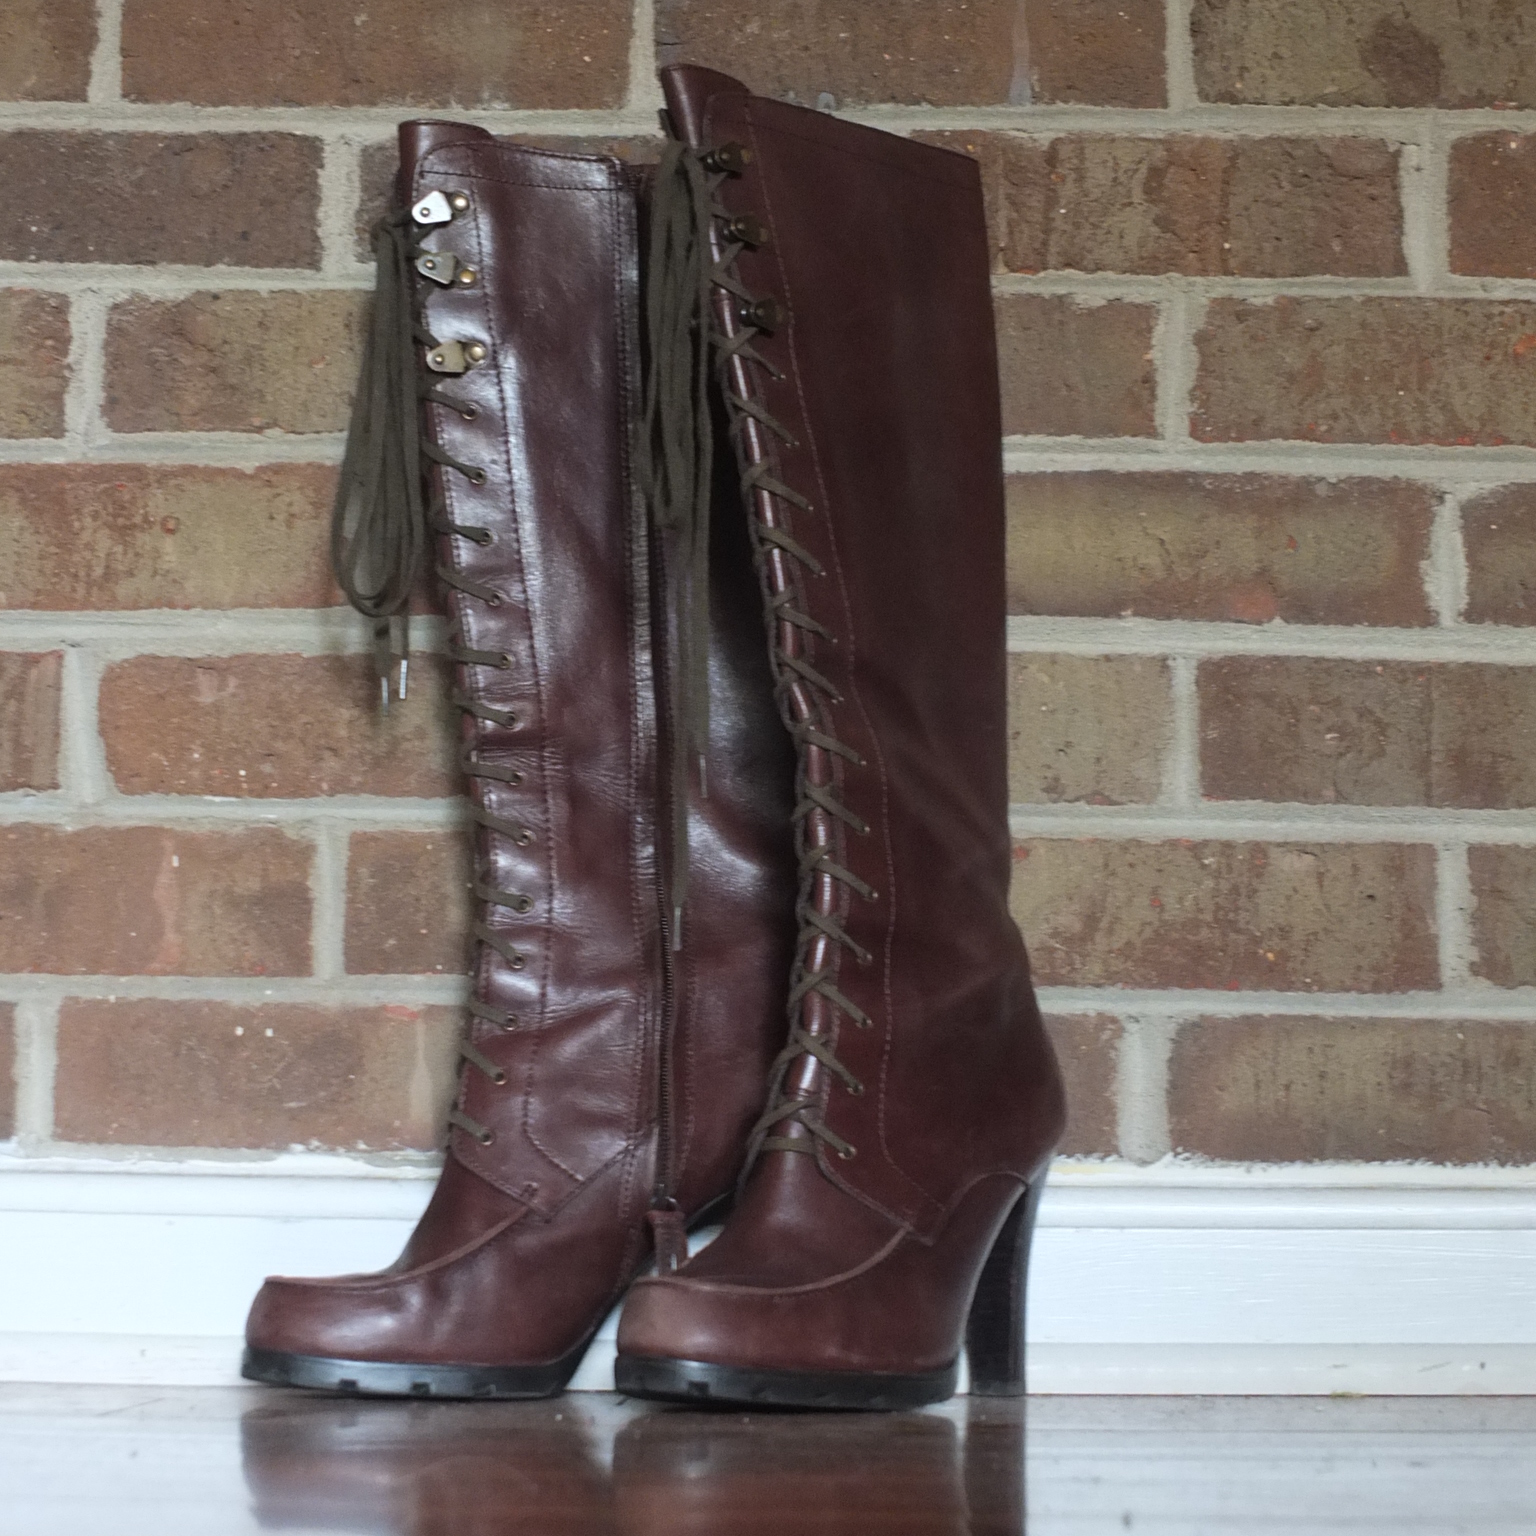 The Unfashionista: Are you ready, boots?